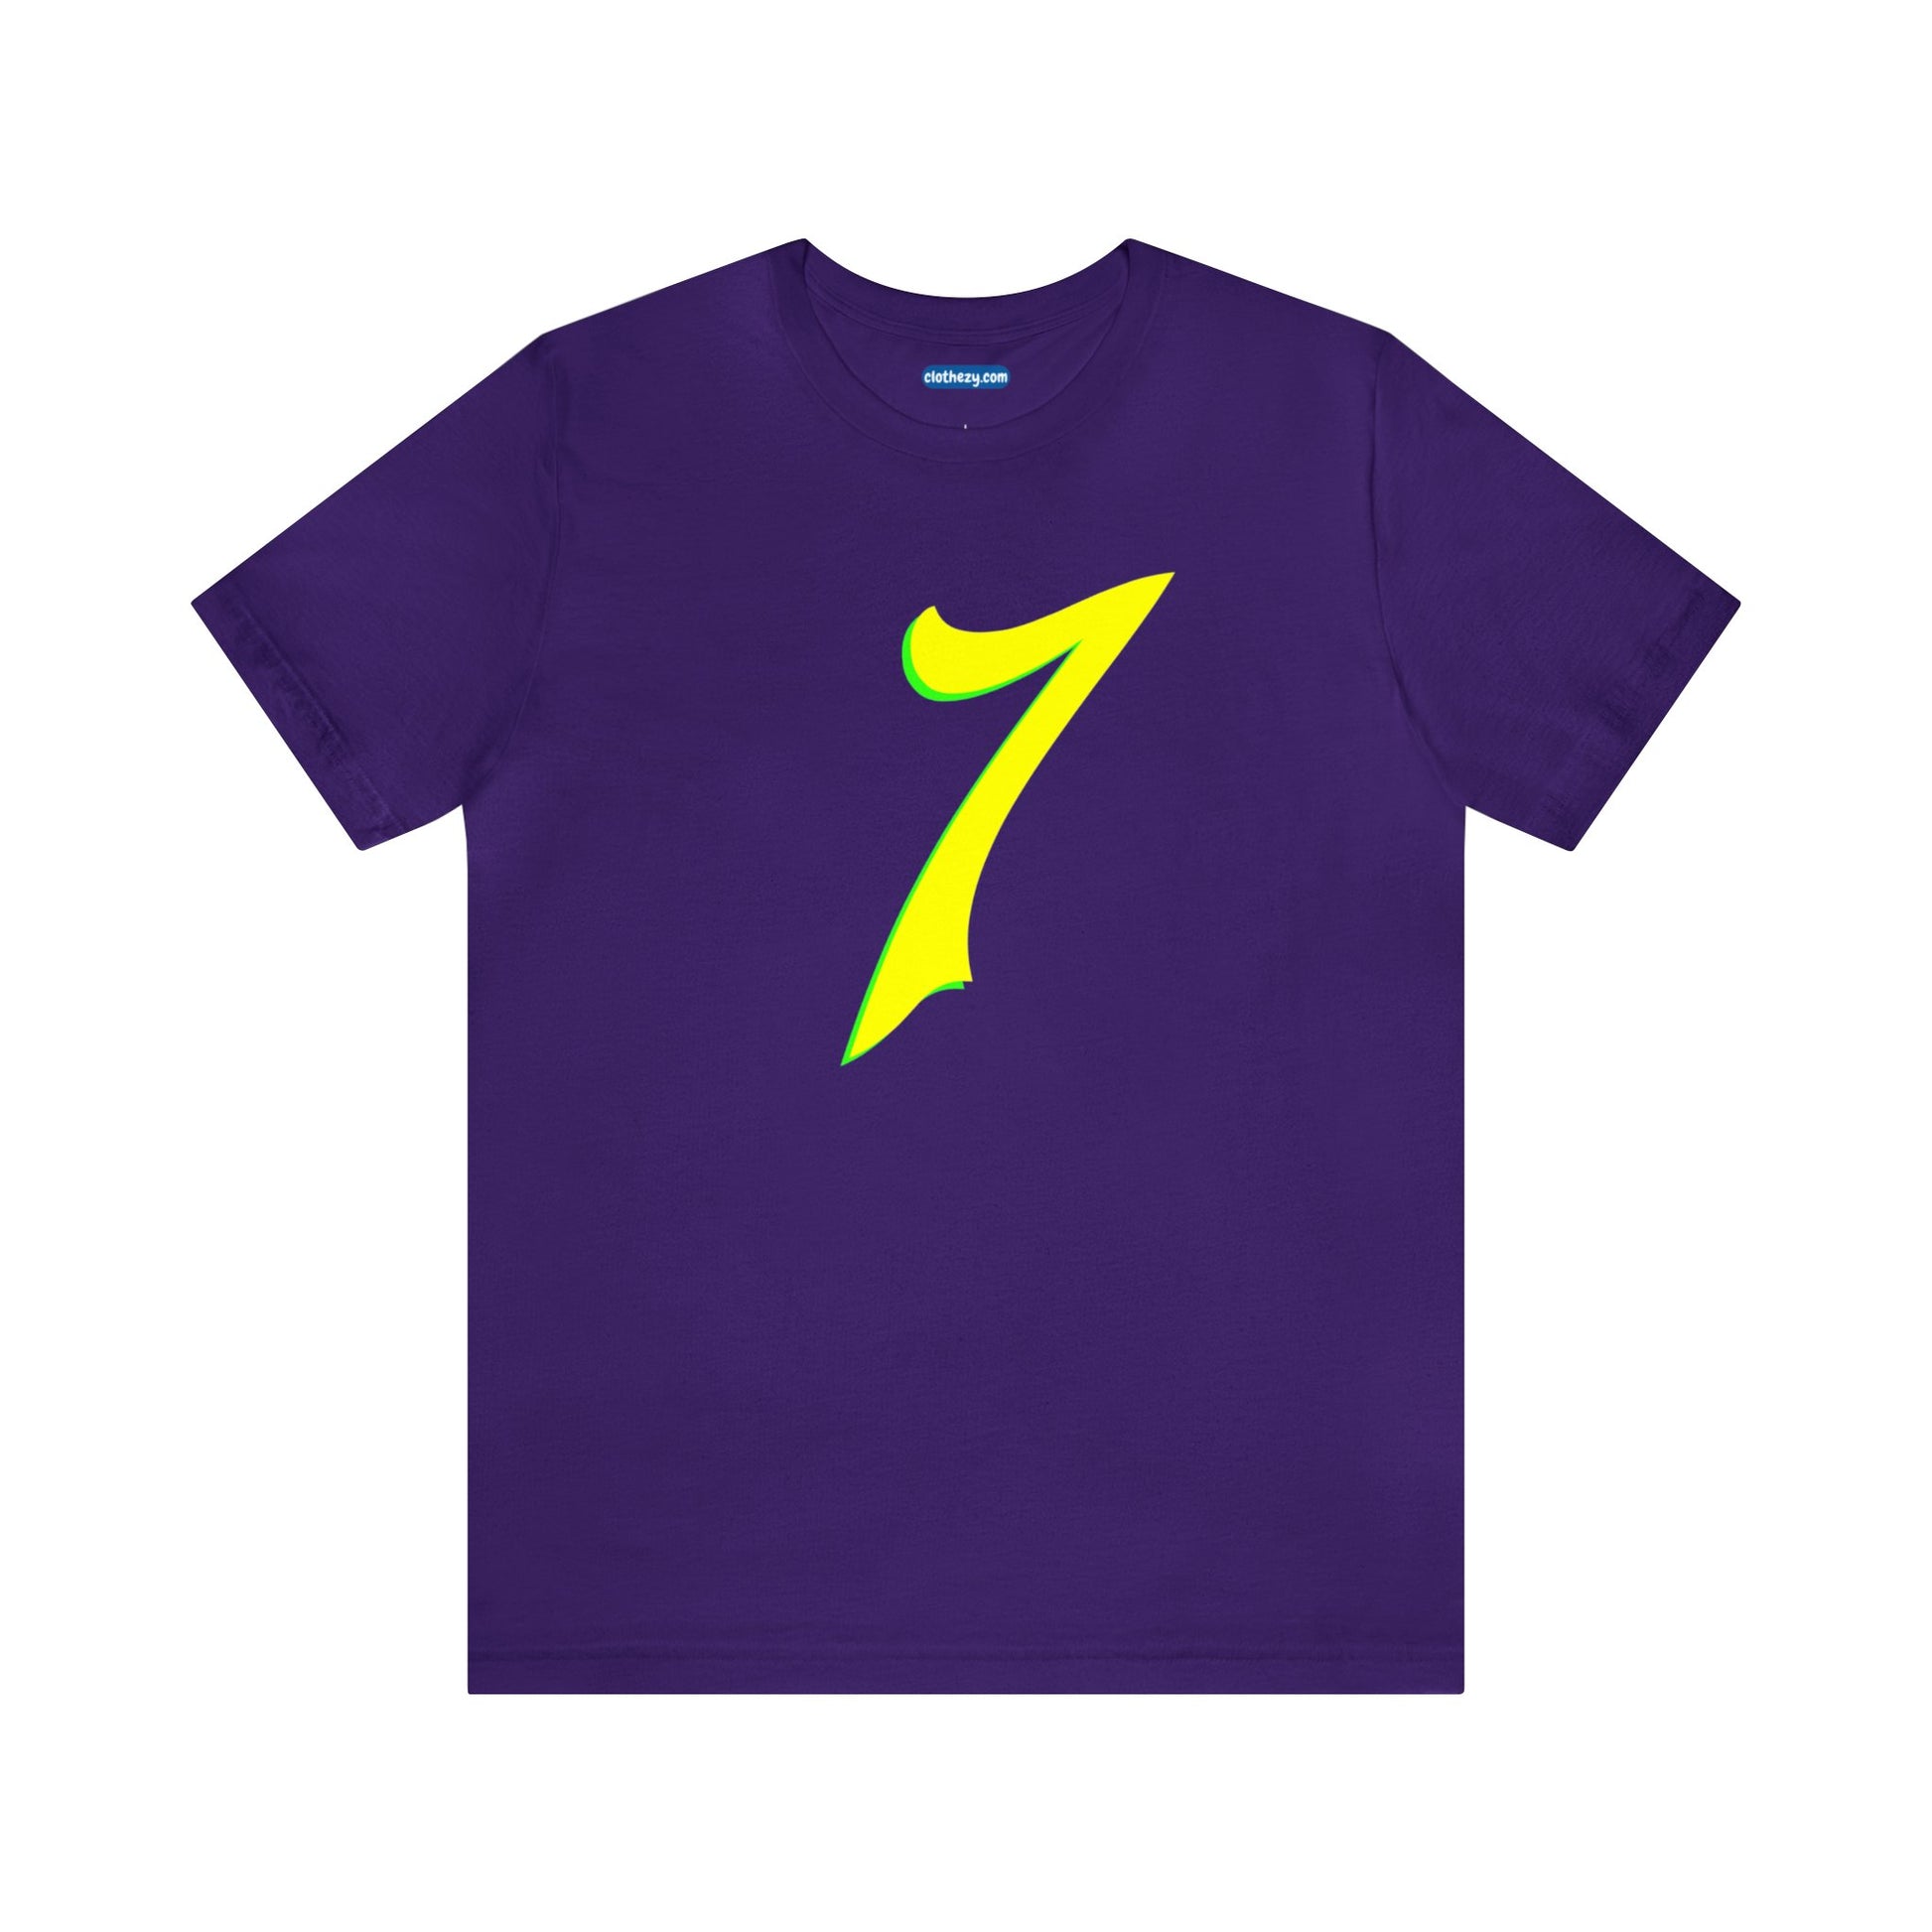 Number 7 Design - Soft Cotton Tee for birthdays and celebrations, Gift for friends and family, Multiple Options by clothezy.com in Purple Size Small - Buy Now